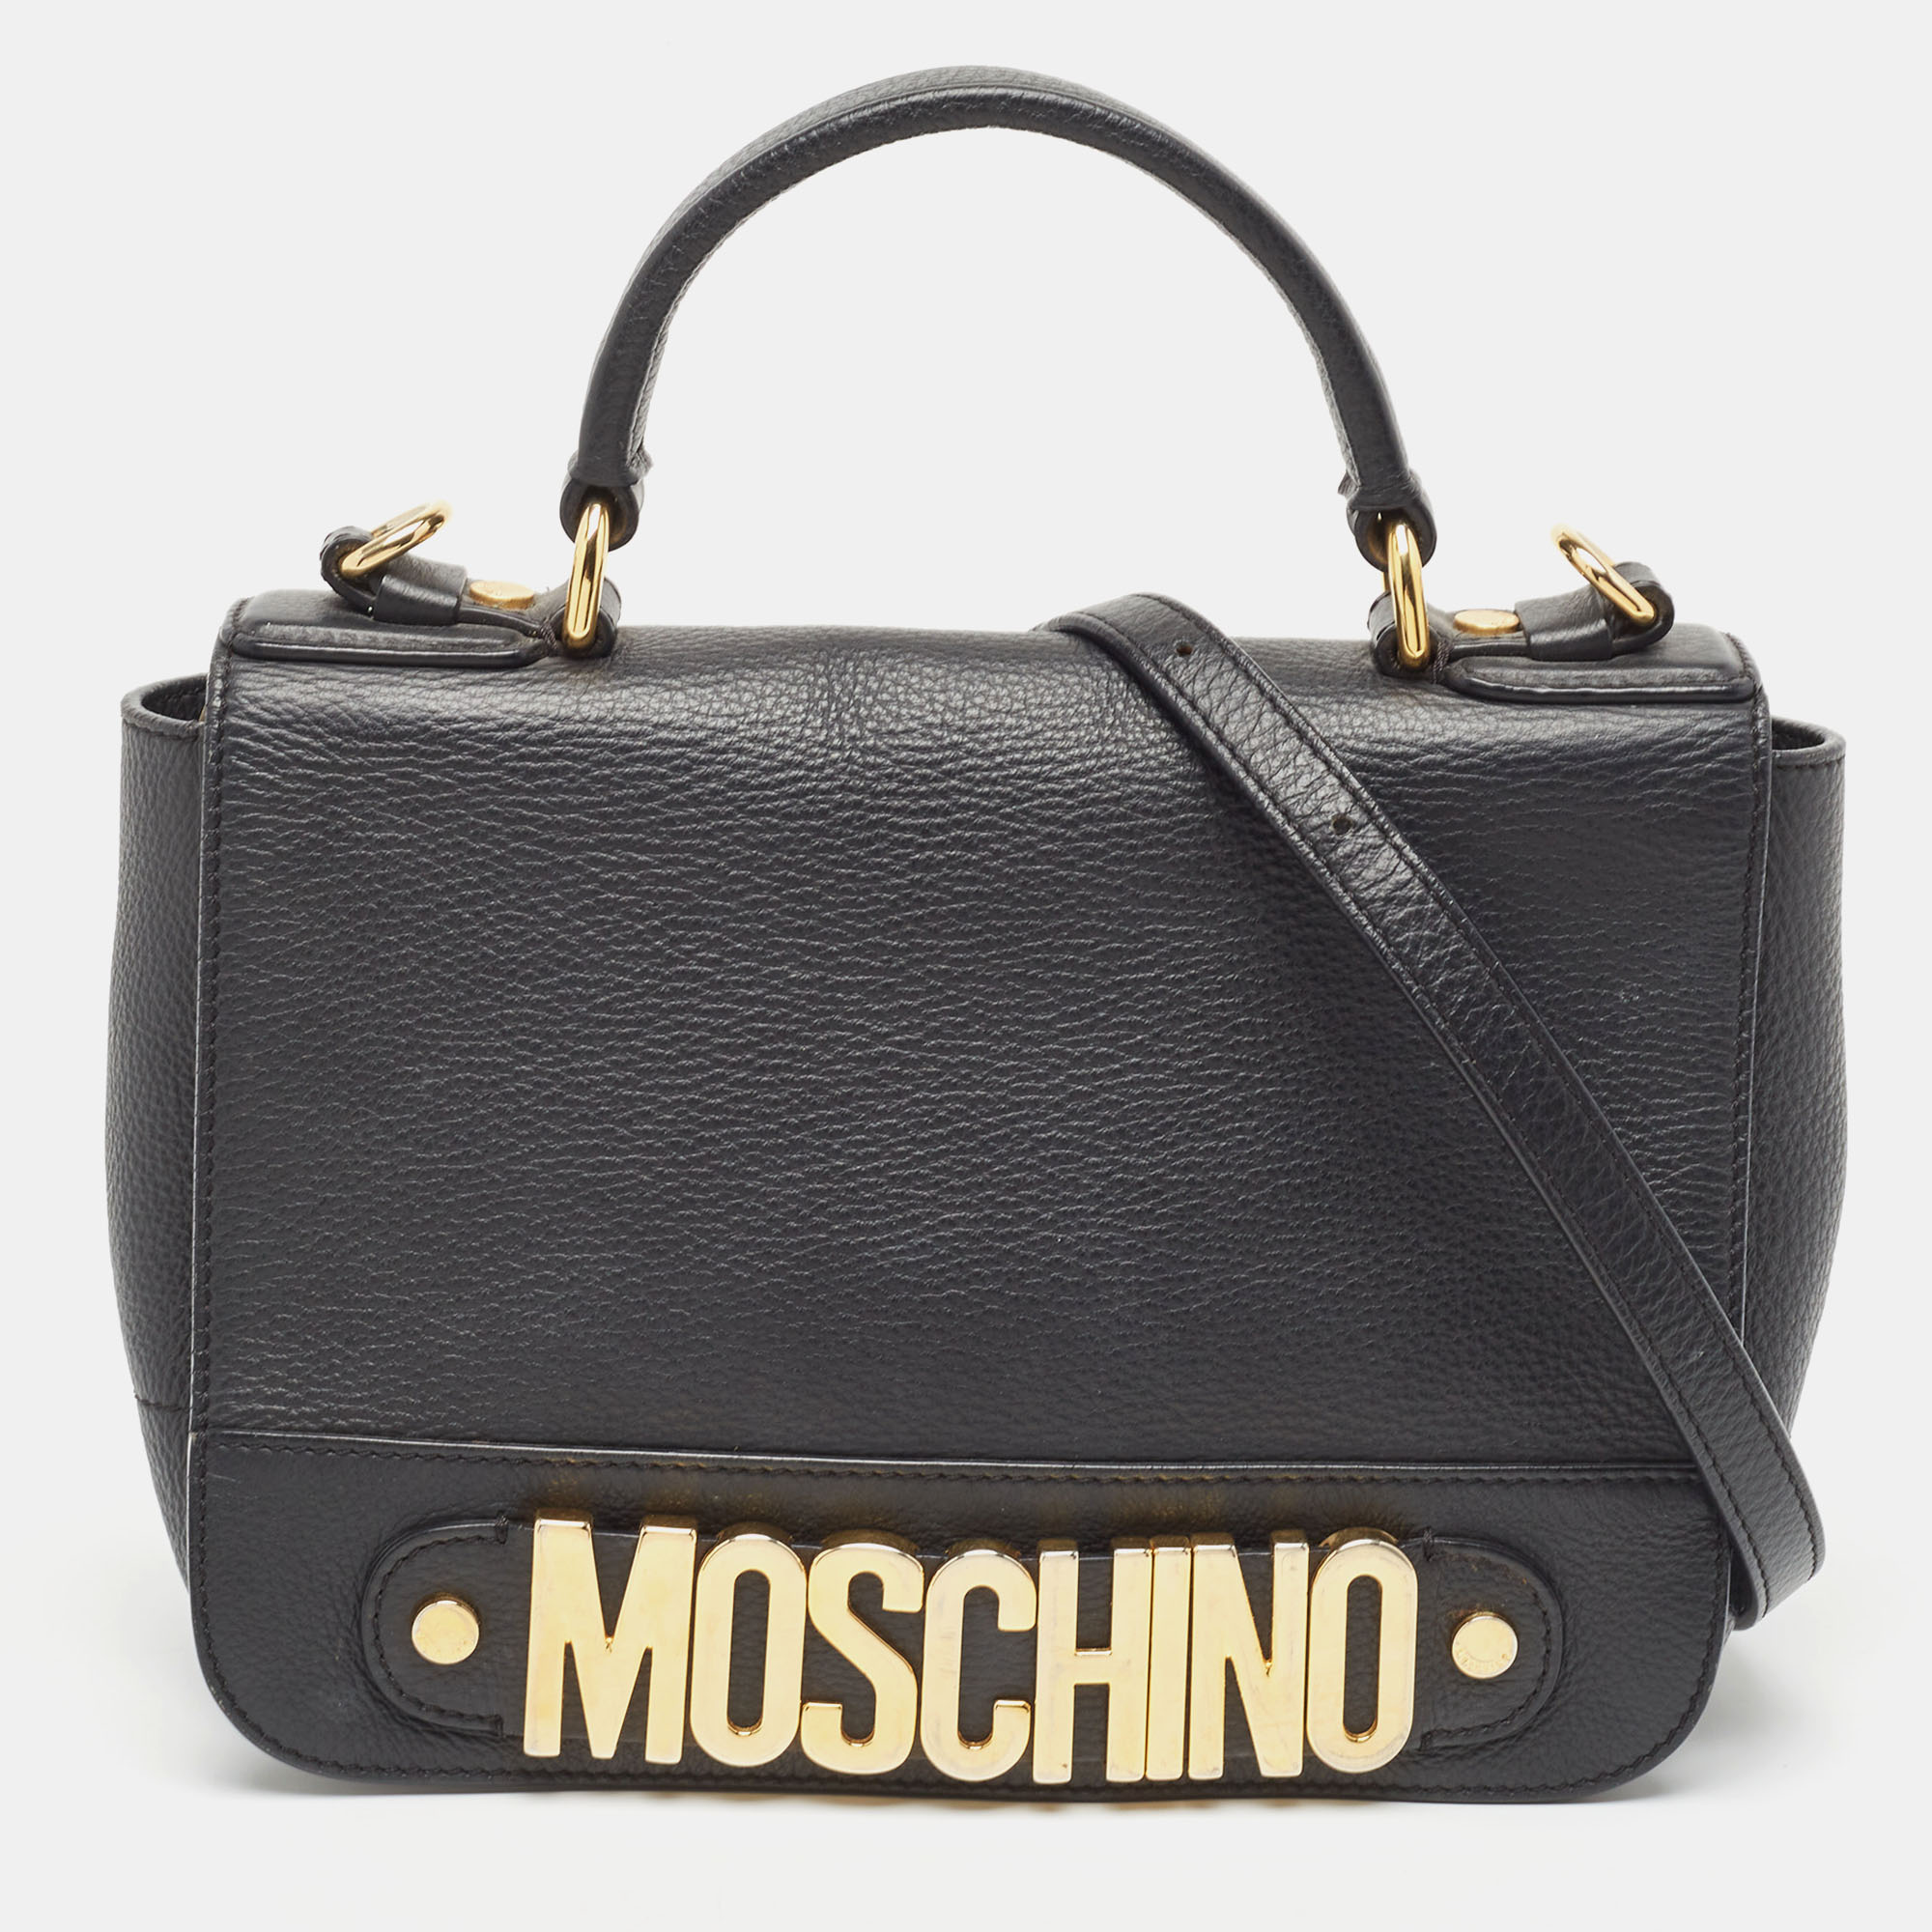 Moschino black leather classic logo top handle bag